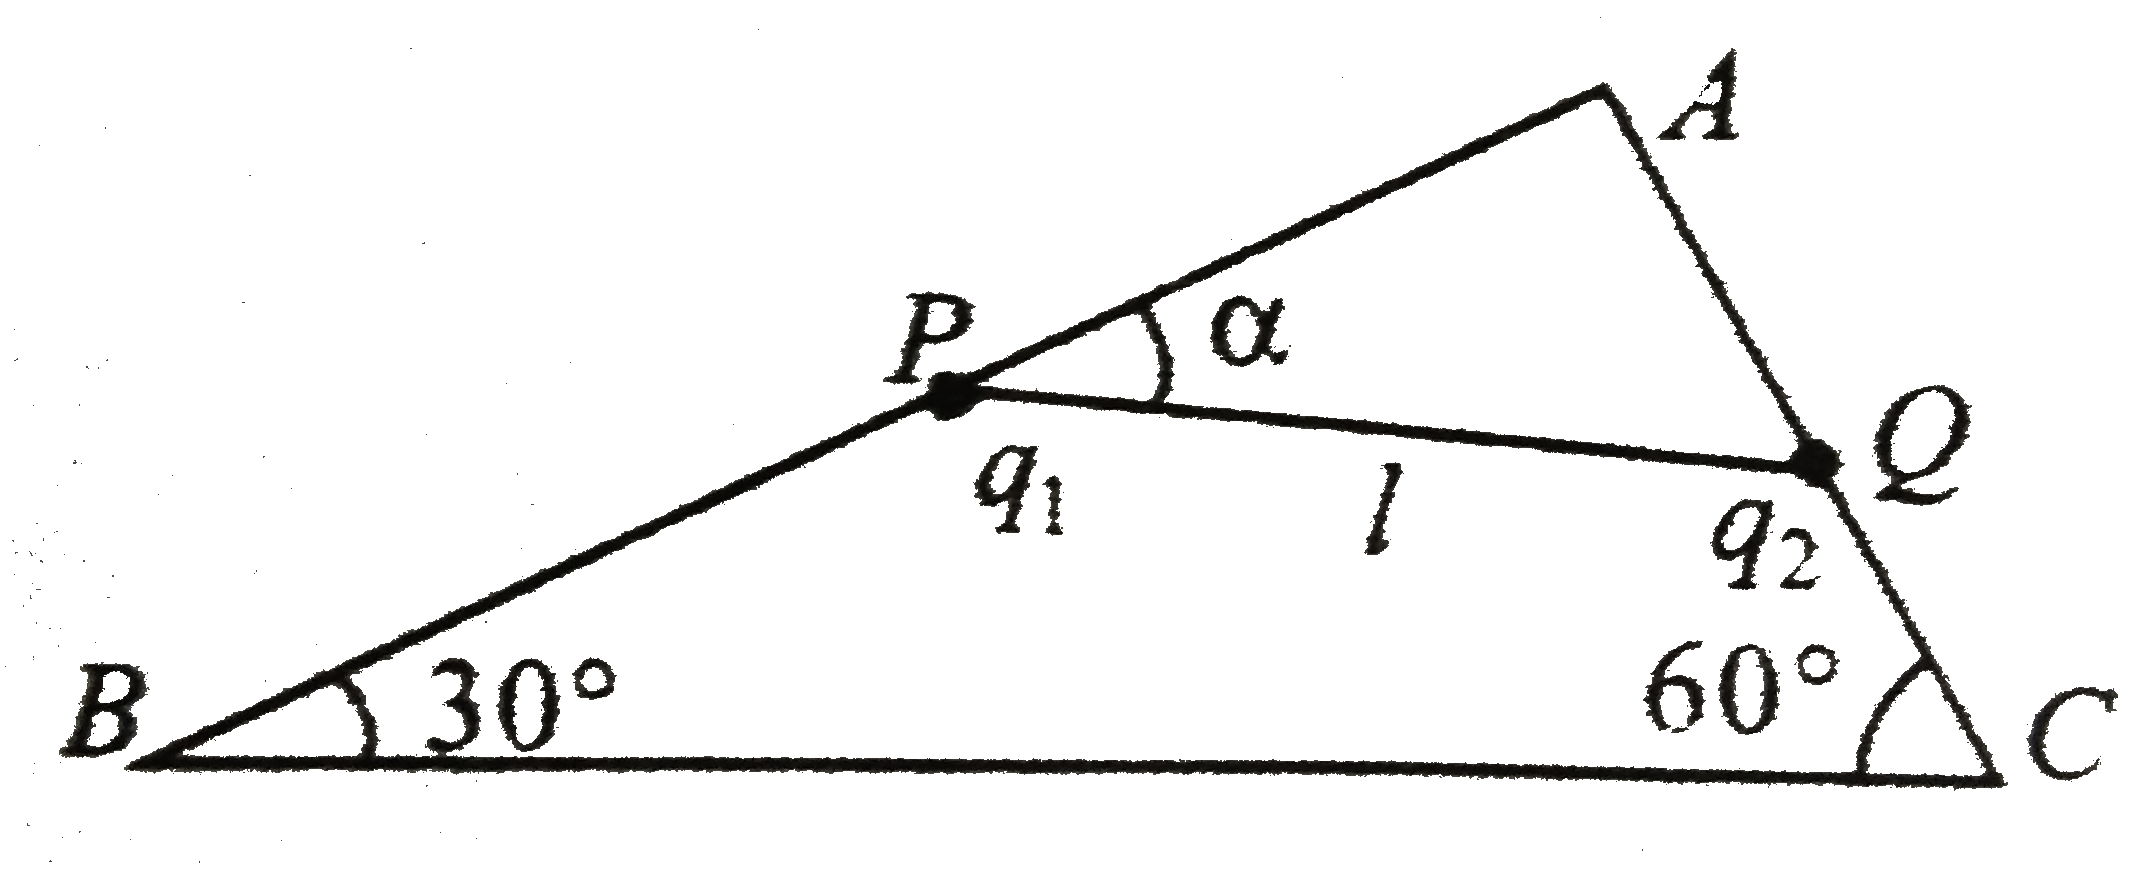 A rigid insulated wire frame in the form of a right-angled triangle ABC is set in a vertical plane as shown in fig. two beads of equal masses m each and carrying charges q(1) and q(2) are connected by a cord of length l and can slide without friction on the wires.   Considering the case when the beads are stationary, determine   (i) the angel alpha   (ii) the tension in the cord, and   (iii) The normal reaction on the beads.   If the cord is now cut, what are the value of the charges for which the beads continue to remain stationary?